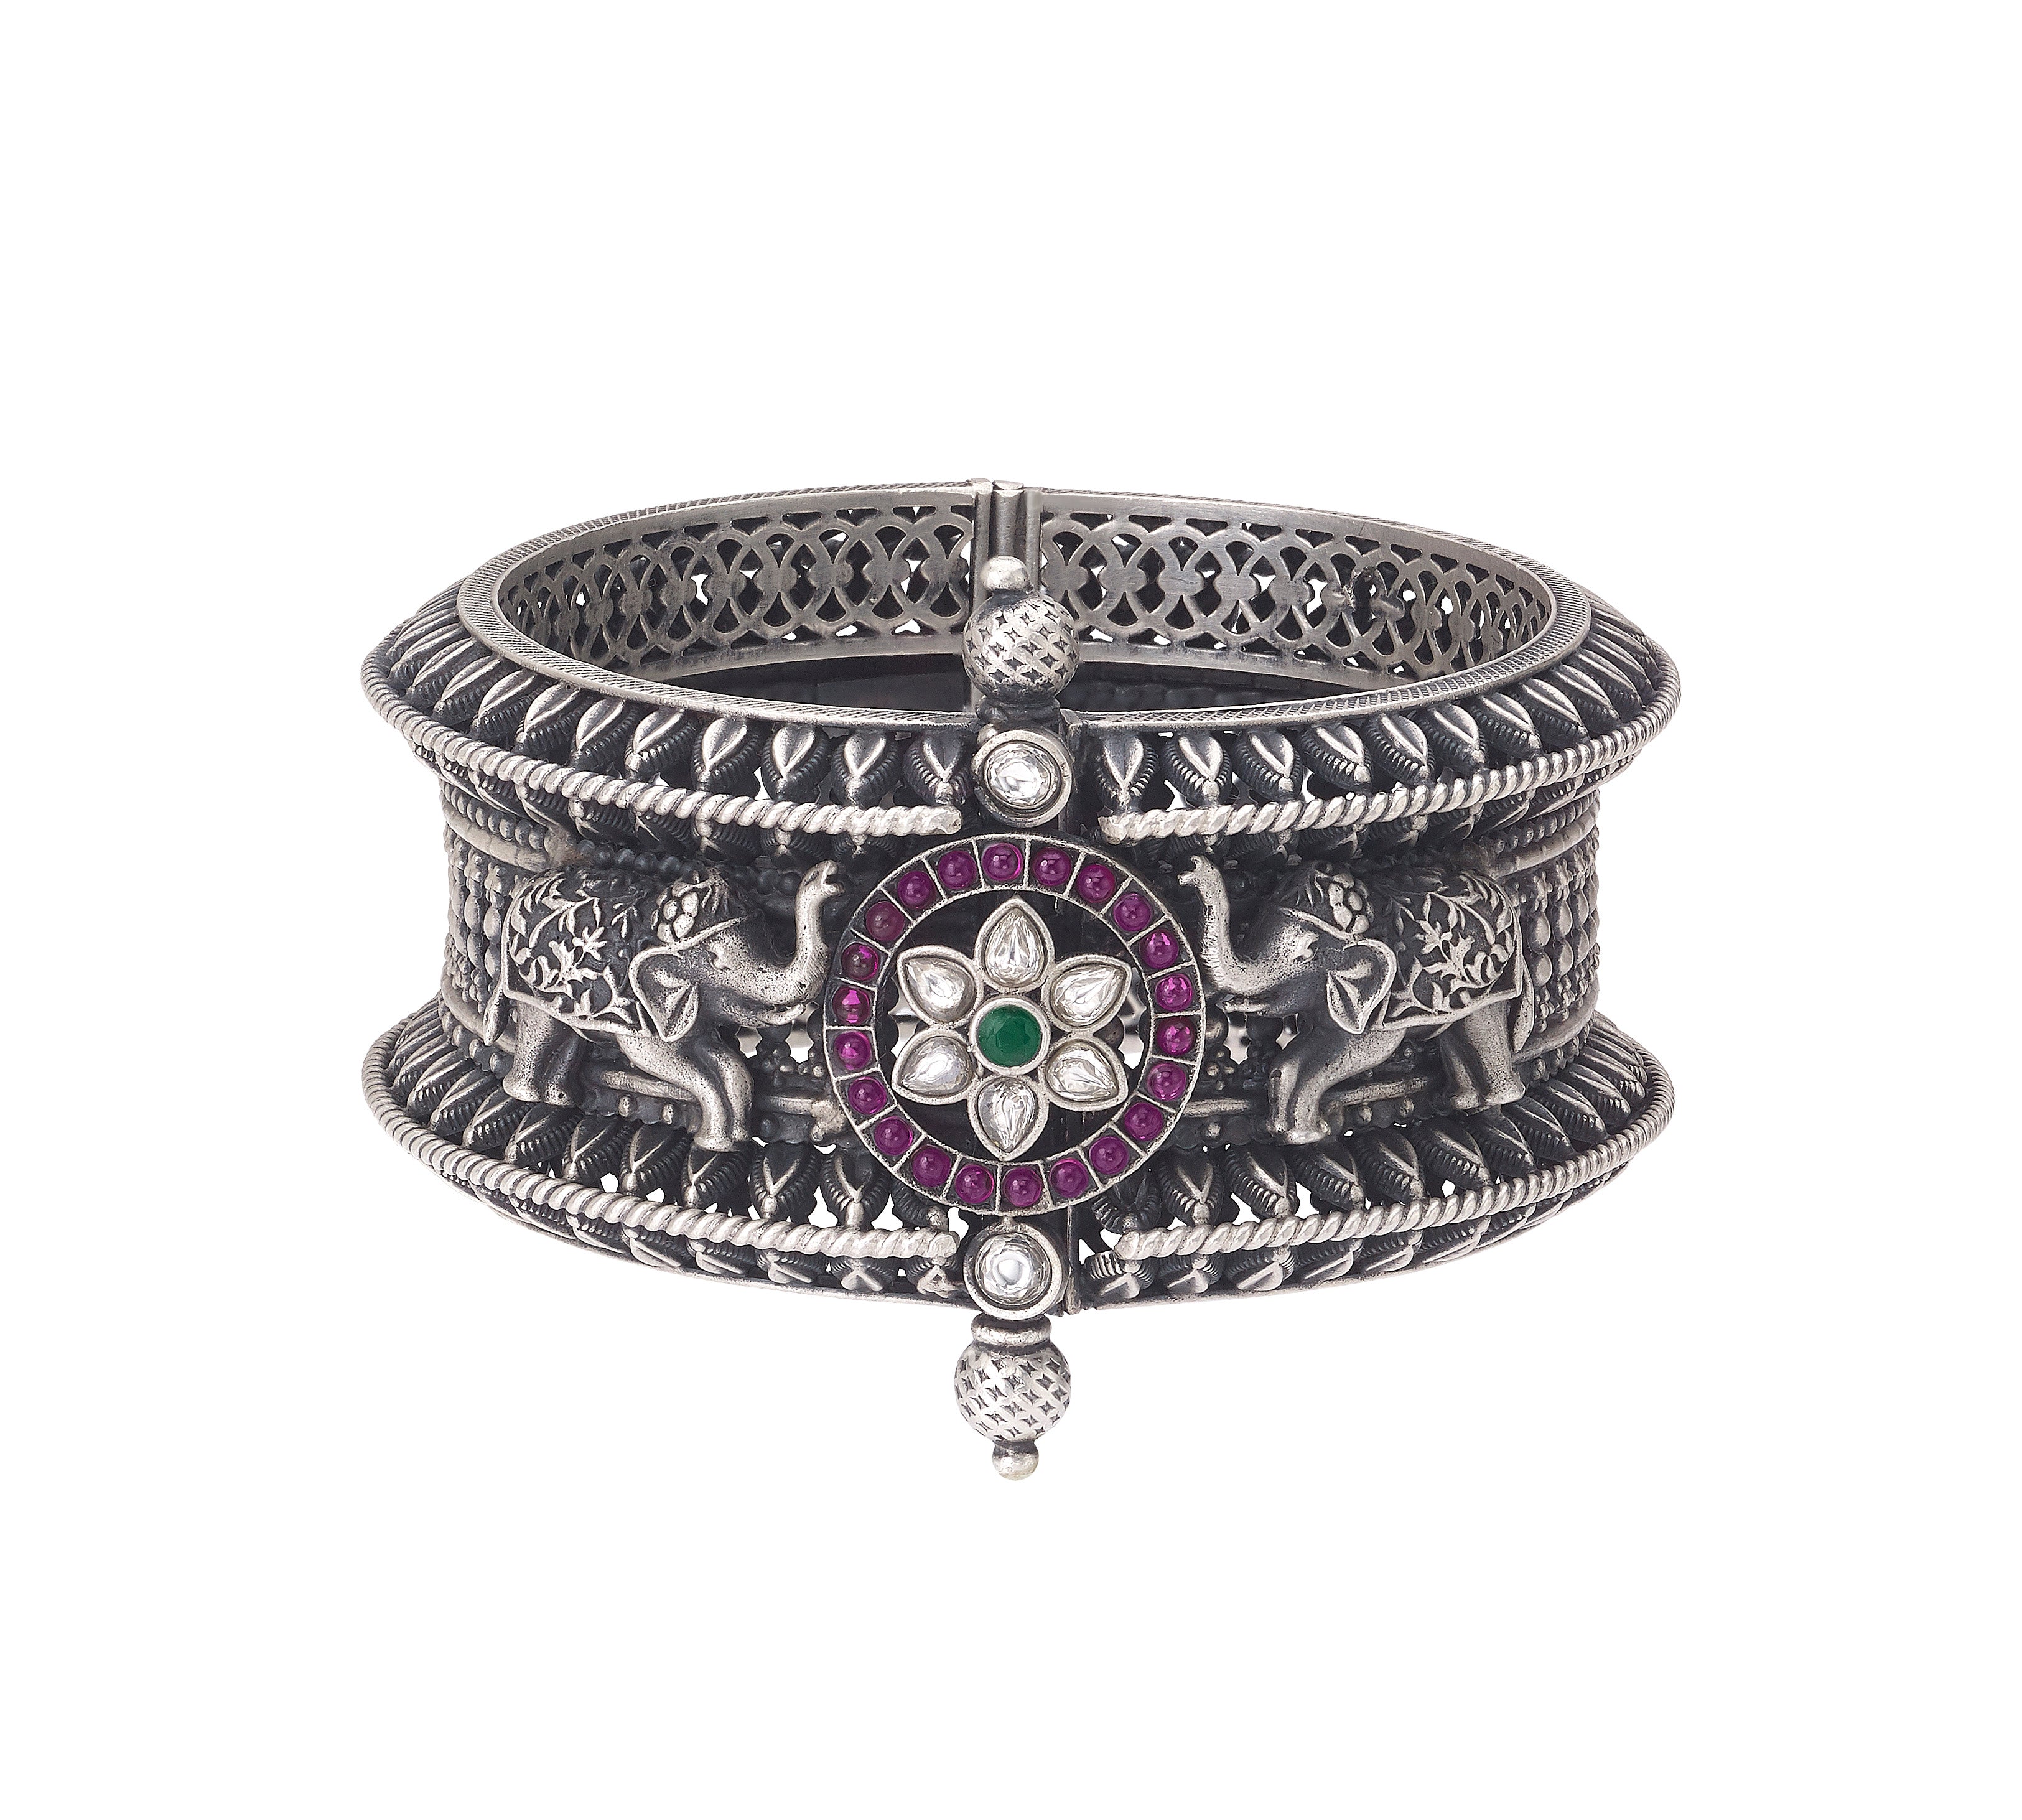 Handcrafted Bangle with Elephant Motifs